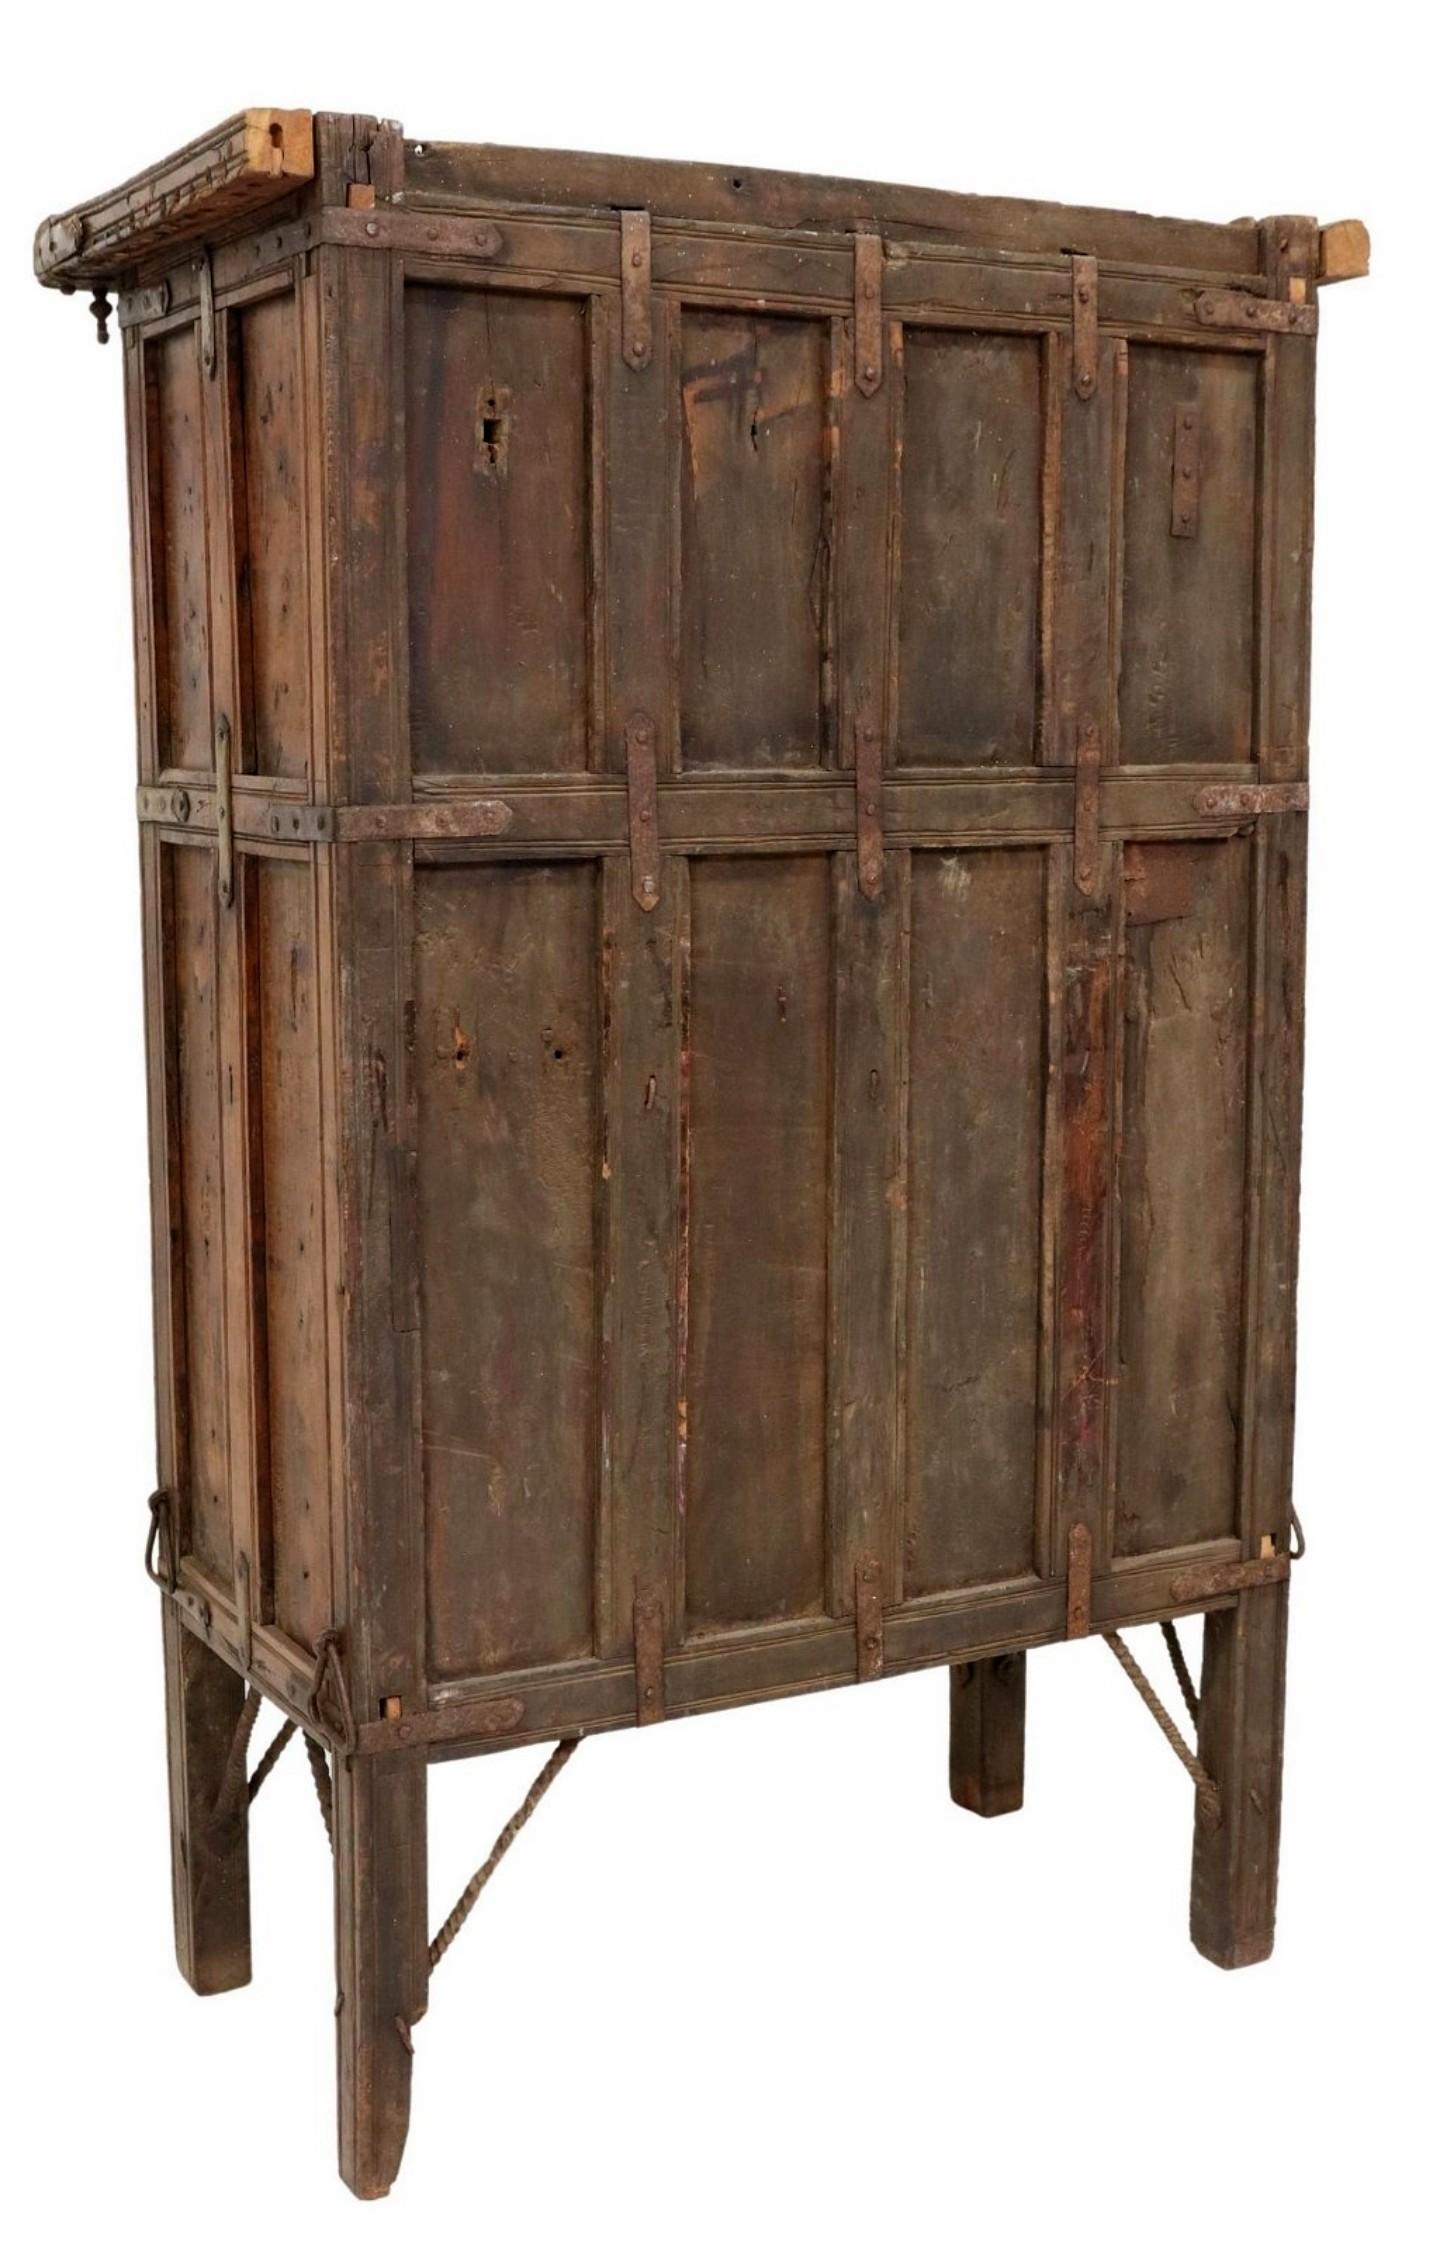 Rustic Antique India Cabinet In Good Condition For Sale In Forney, TX